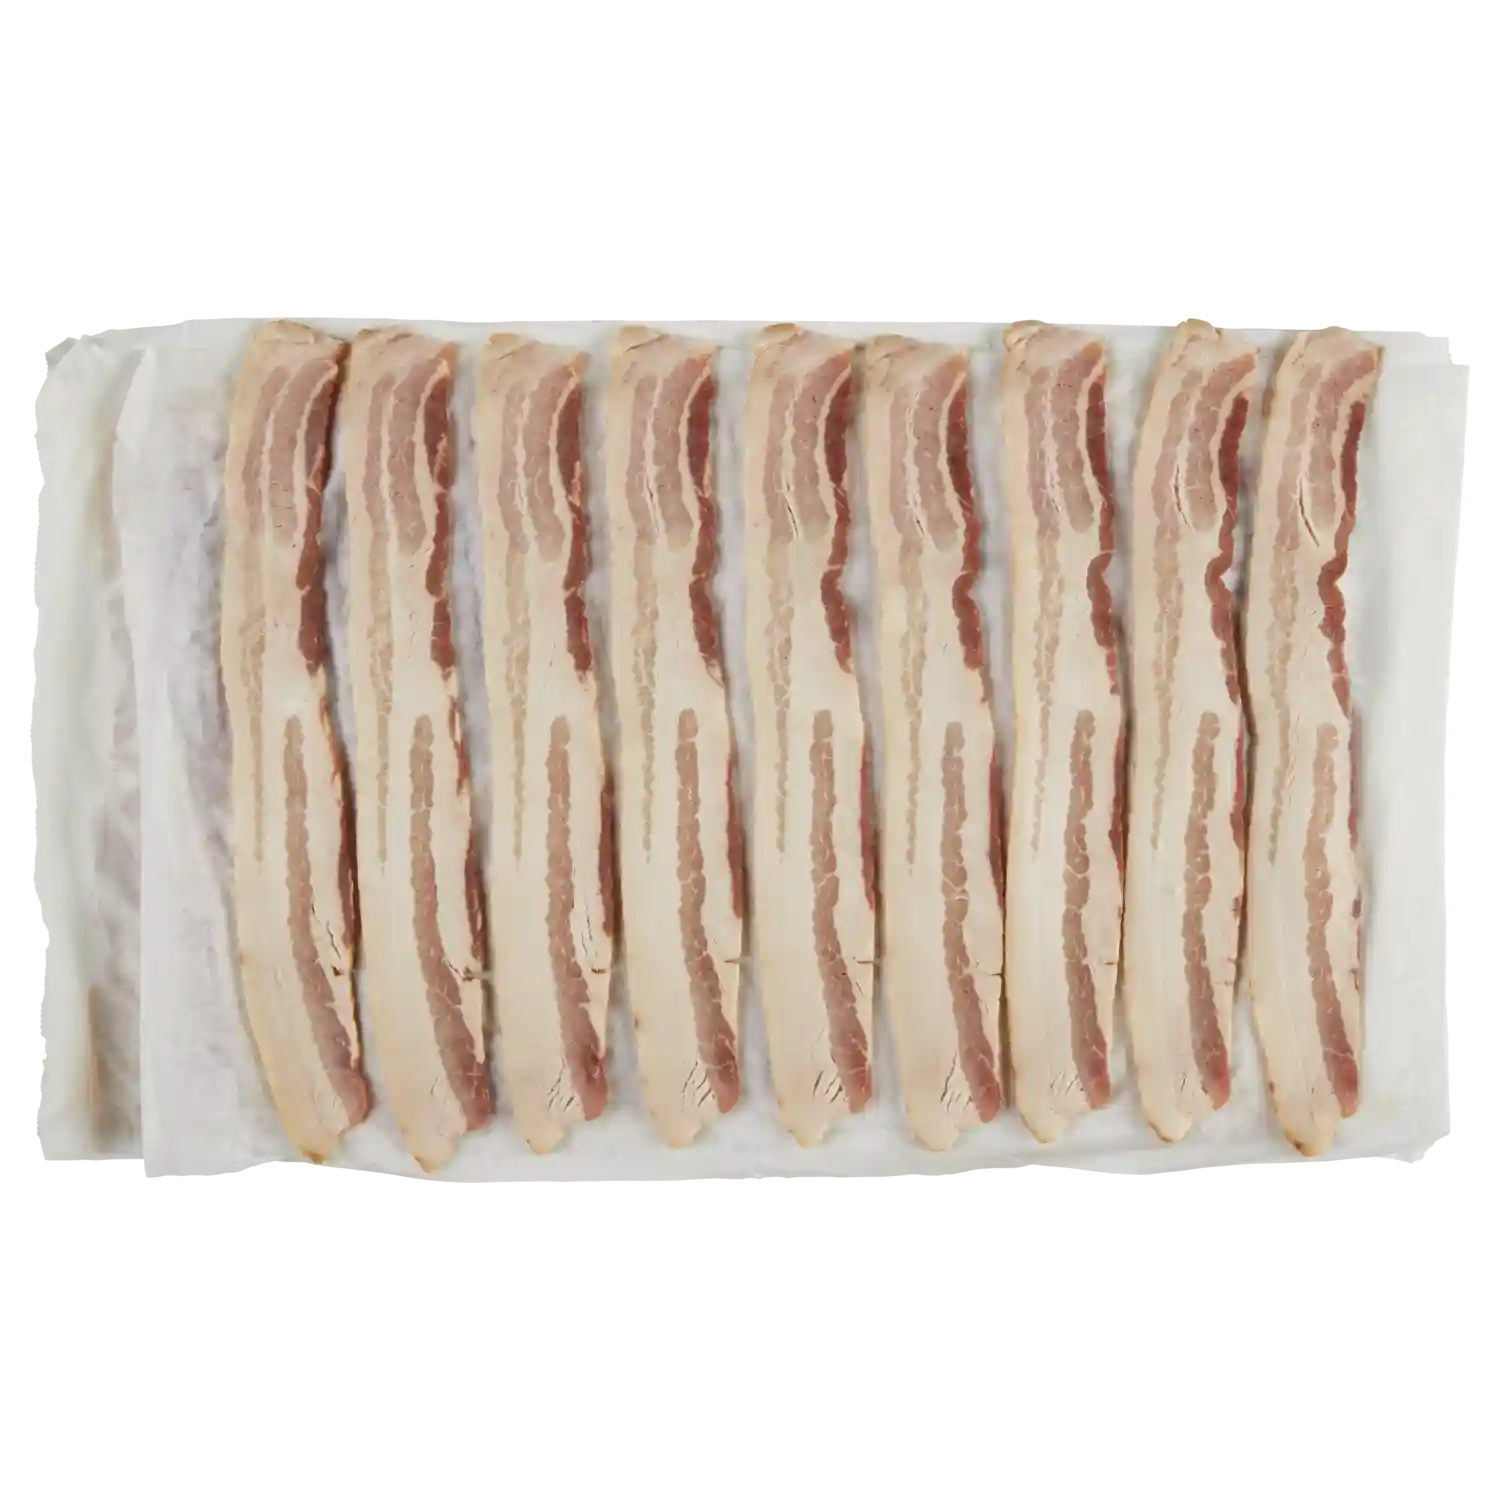 Wright® Brand Naturally Smoked Thick Sliced Bacon, Flat-Pack®, 10-14 Slices per Pound, Frozen_image_31